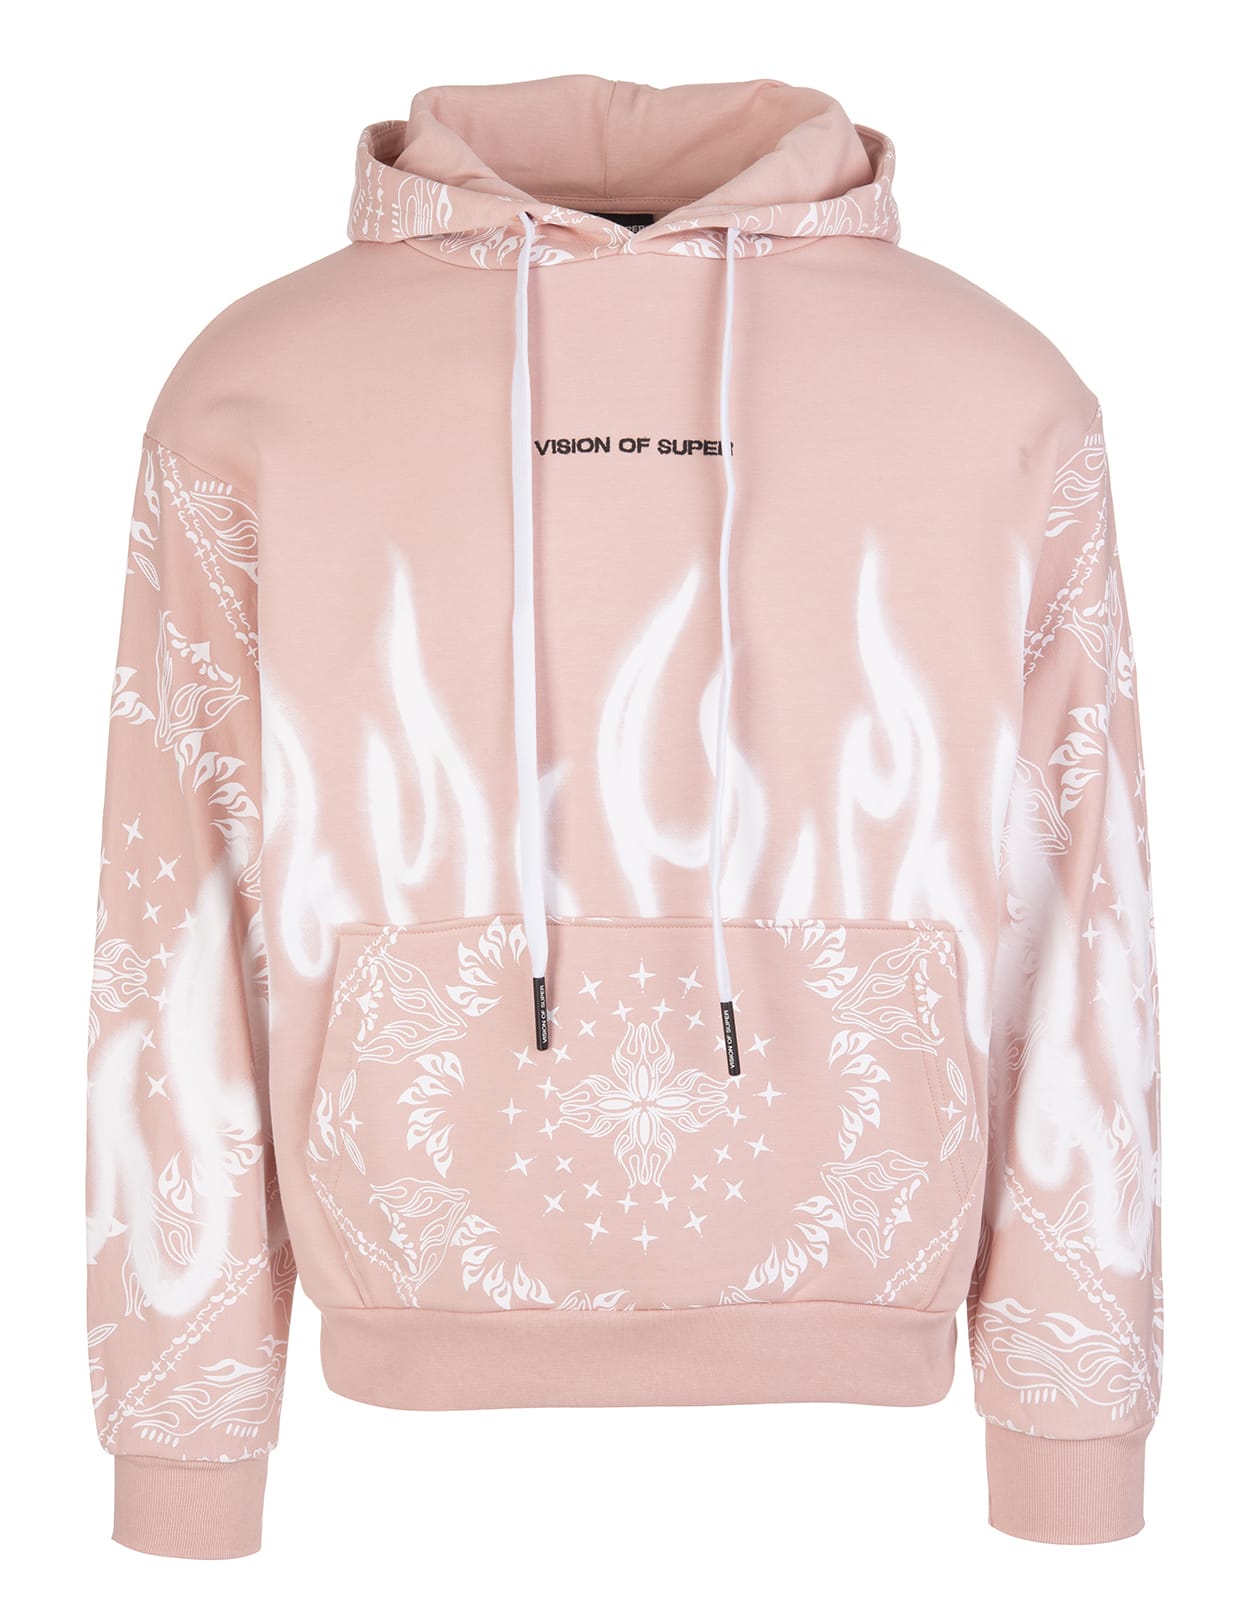 Vision of Super Unisex Pink Hoodie With Bandana Print